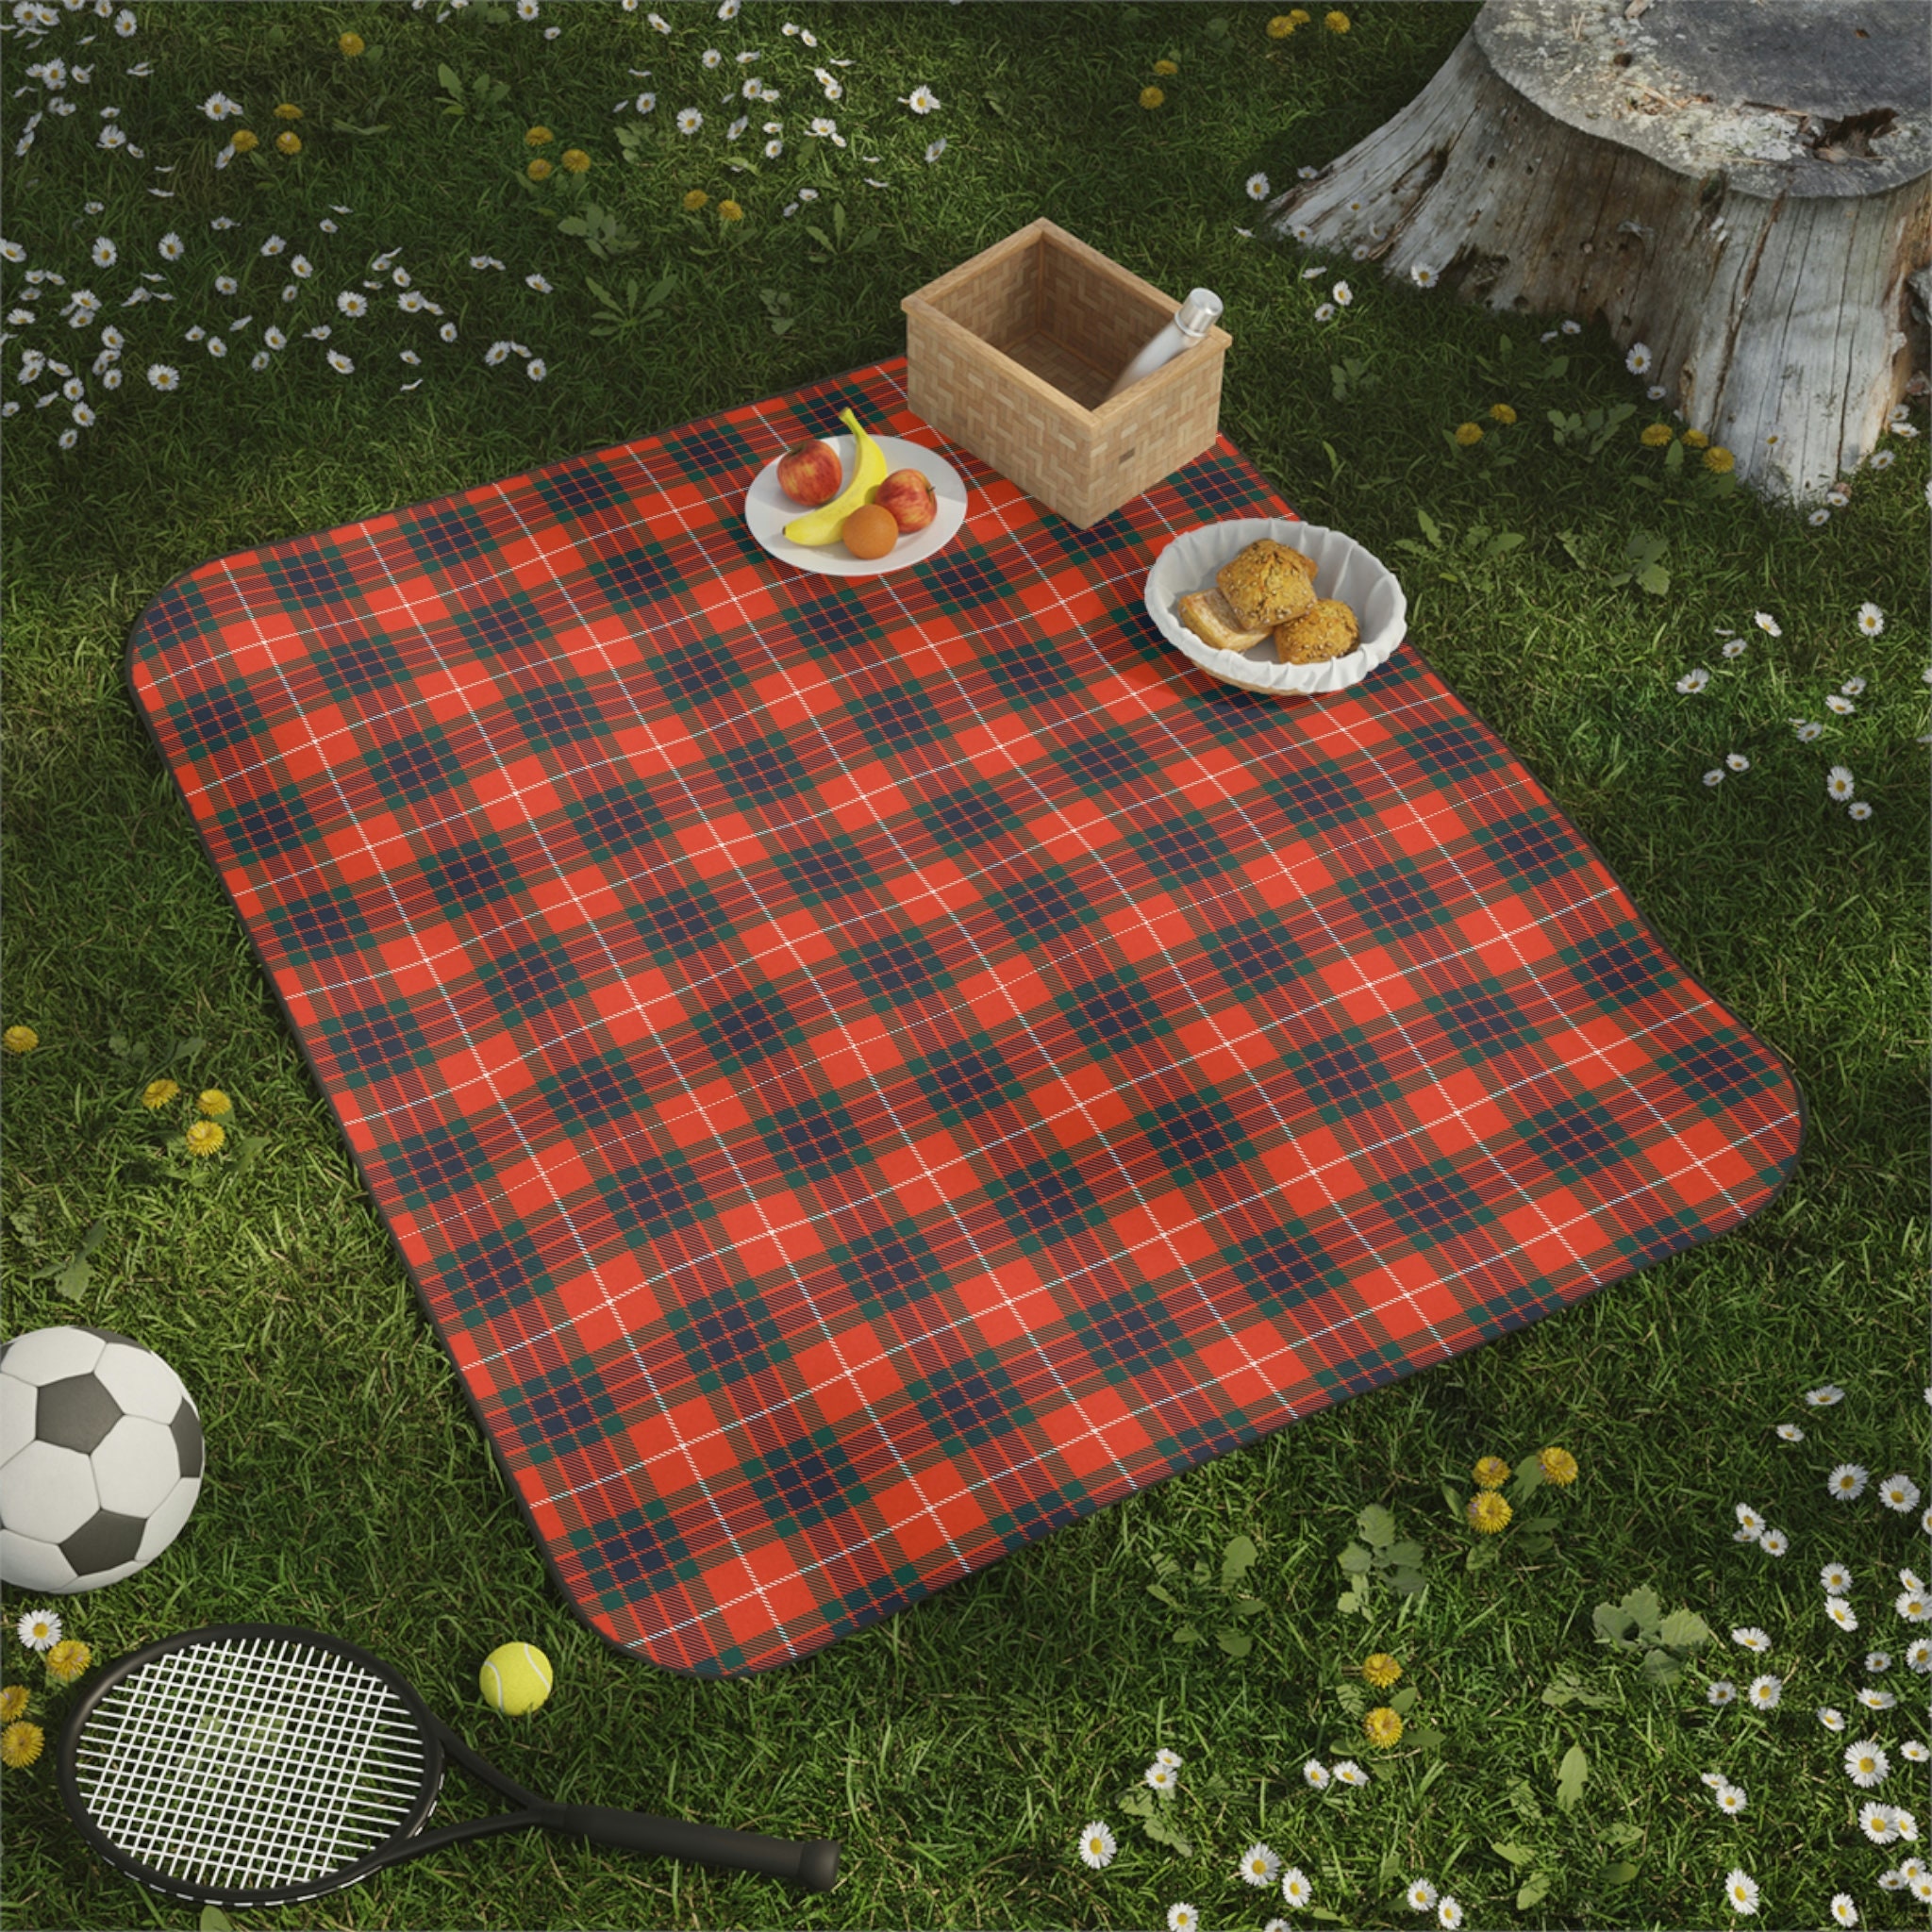 REDCAMP Outdoor Waterproof Picnic Blanket,Foldable Picnic Mat Green and Blue Plaid / 79x59